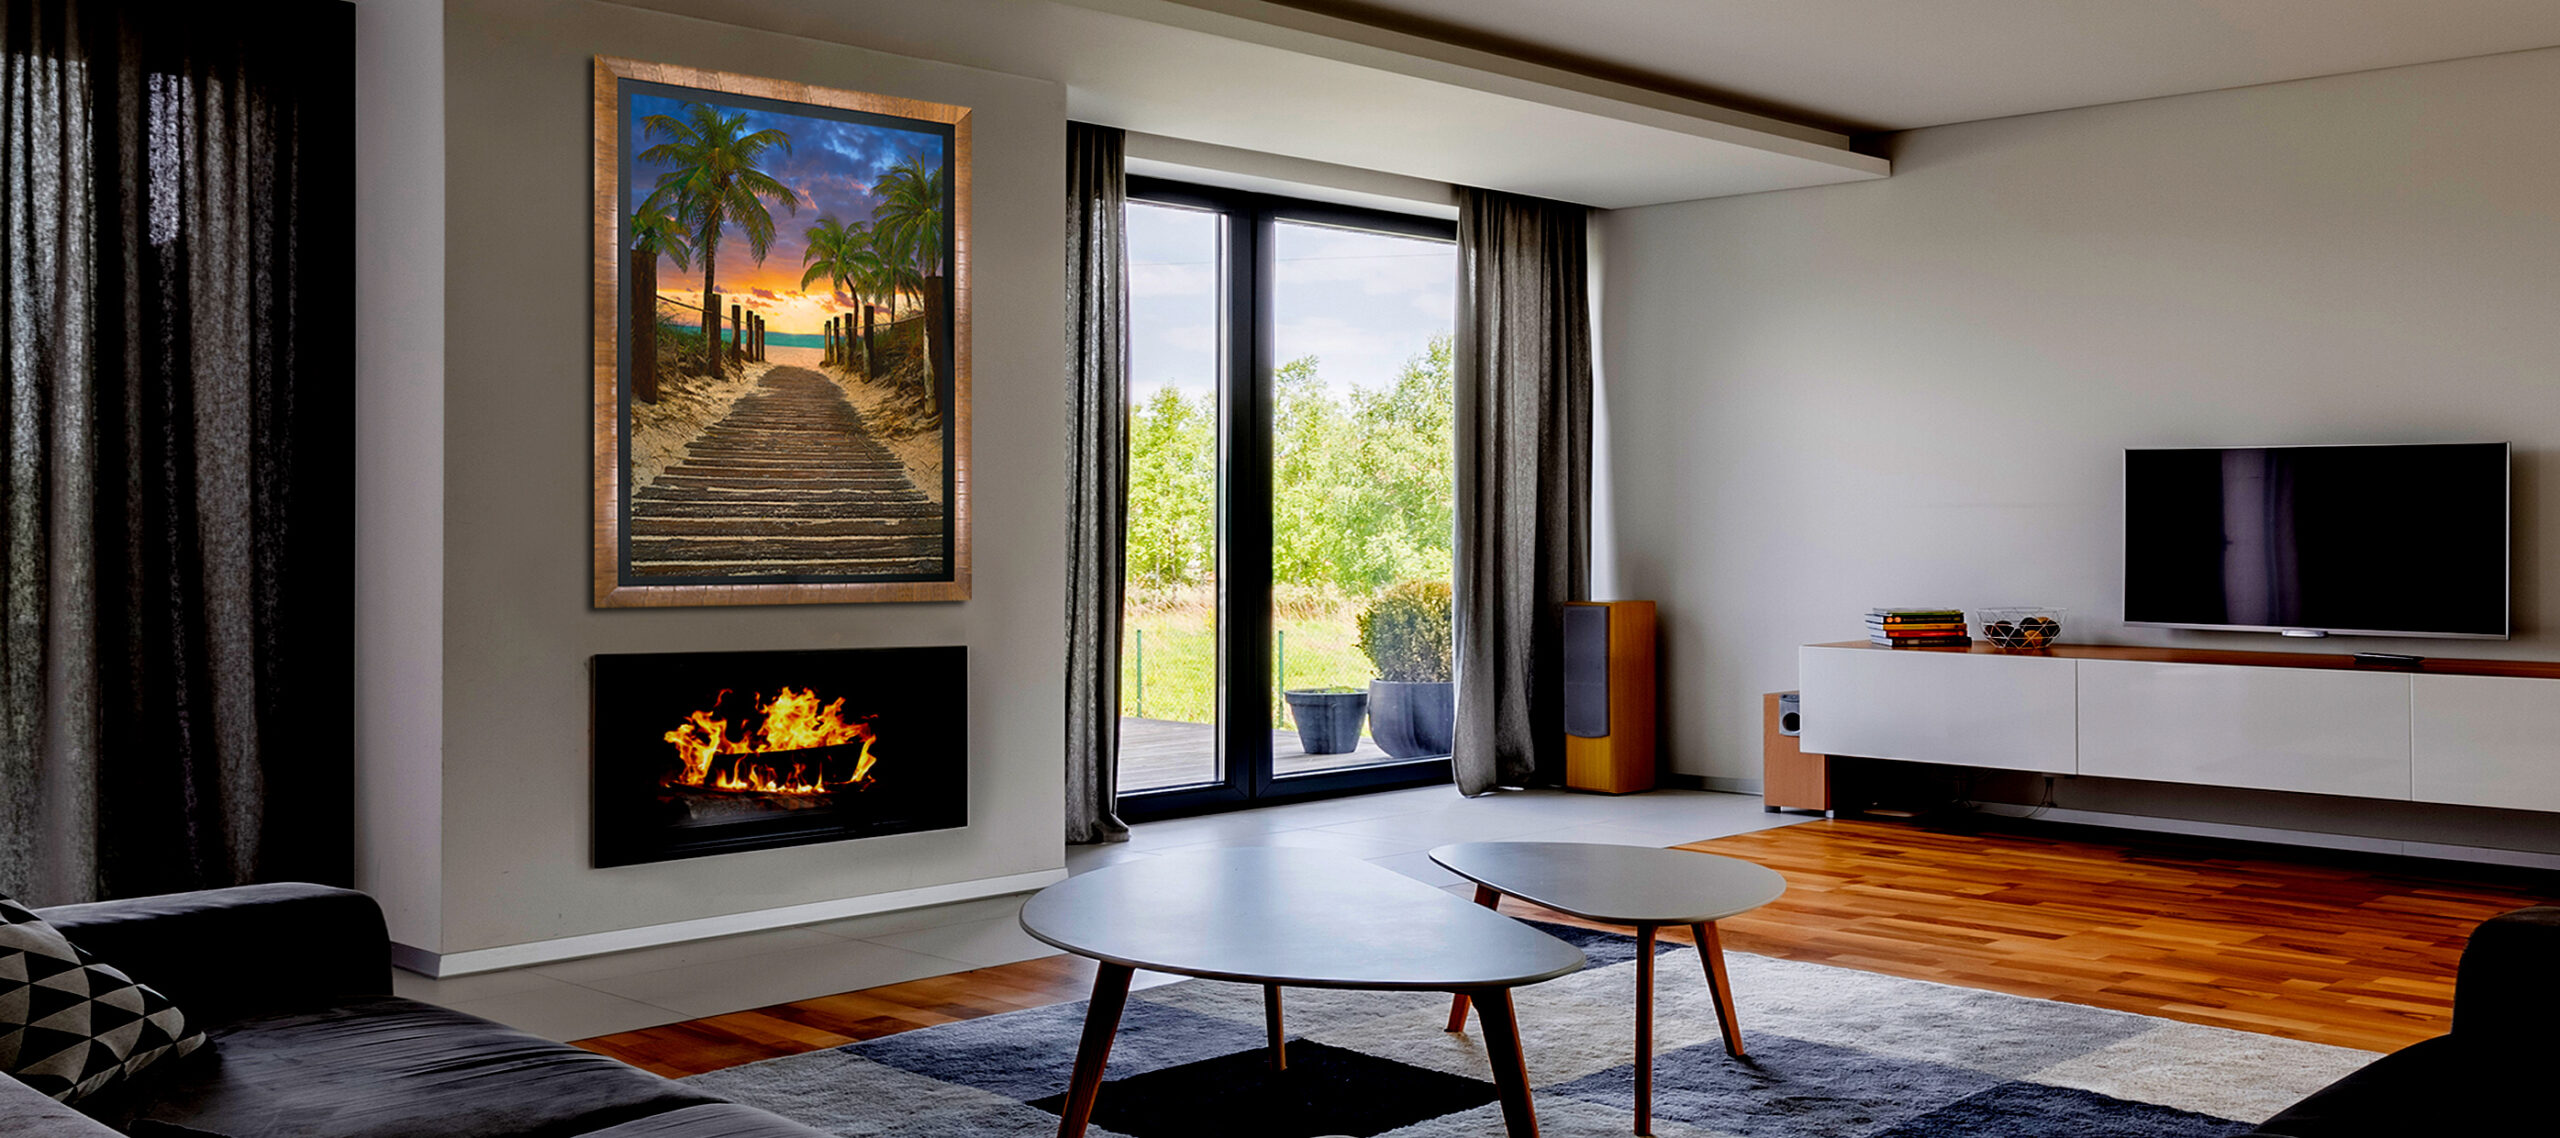 Panoramic,View,Of,Luxurious,Living,Room,With,Fireplace,,Tv,And